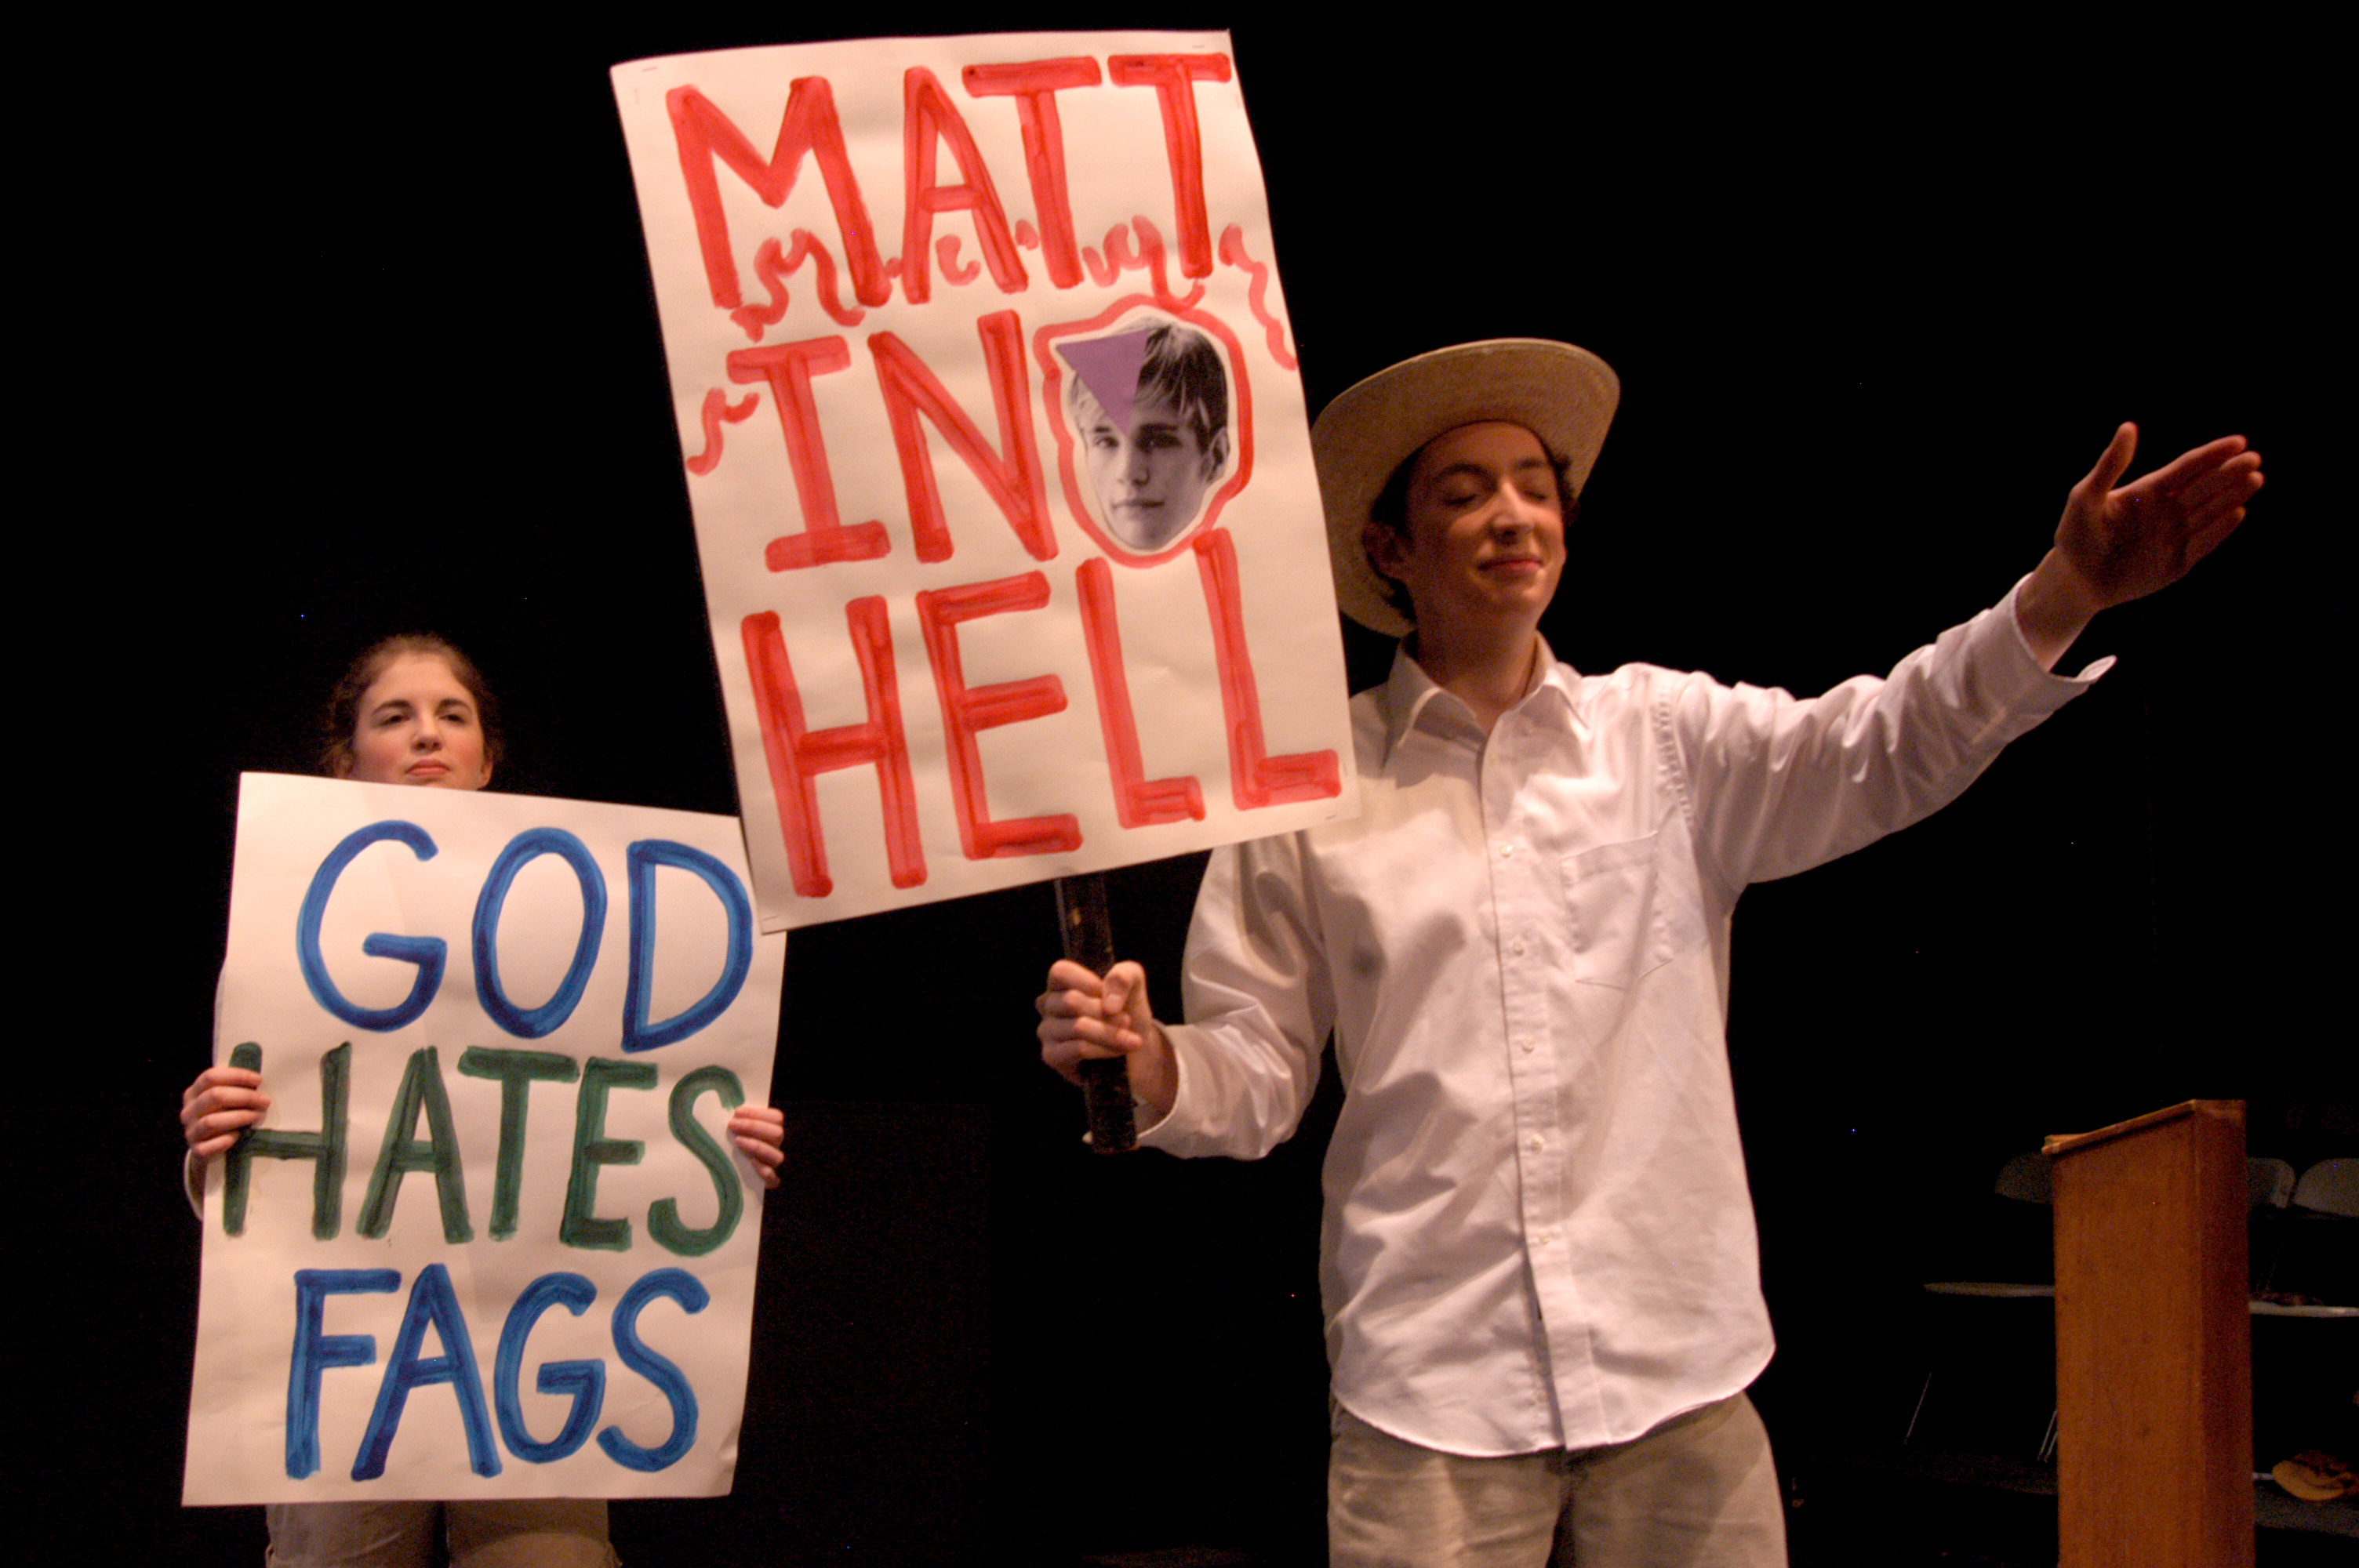 This is an example of discrimination that is portrayed in a high school play. These students from Mercer Island High School are playing Westboro Baptist Church protestors in the play The Laramie Project that tells the story of the murder of a gay college student, Matthew Shephard.^[[Image](https://www.flickr.com/photos/91281489@N00/286552276/) by [Jeff Hitchcock](https://www.flickr.com/photos/91281489@N00/286552276/) is licensed under [CC BY 2.0](https://creativecommons.org/licenses/by/2.0/)]